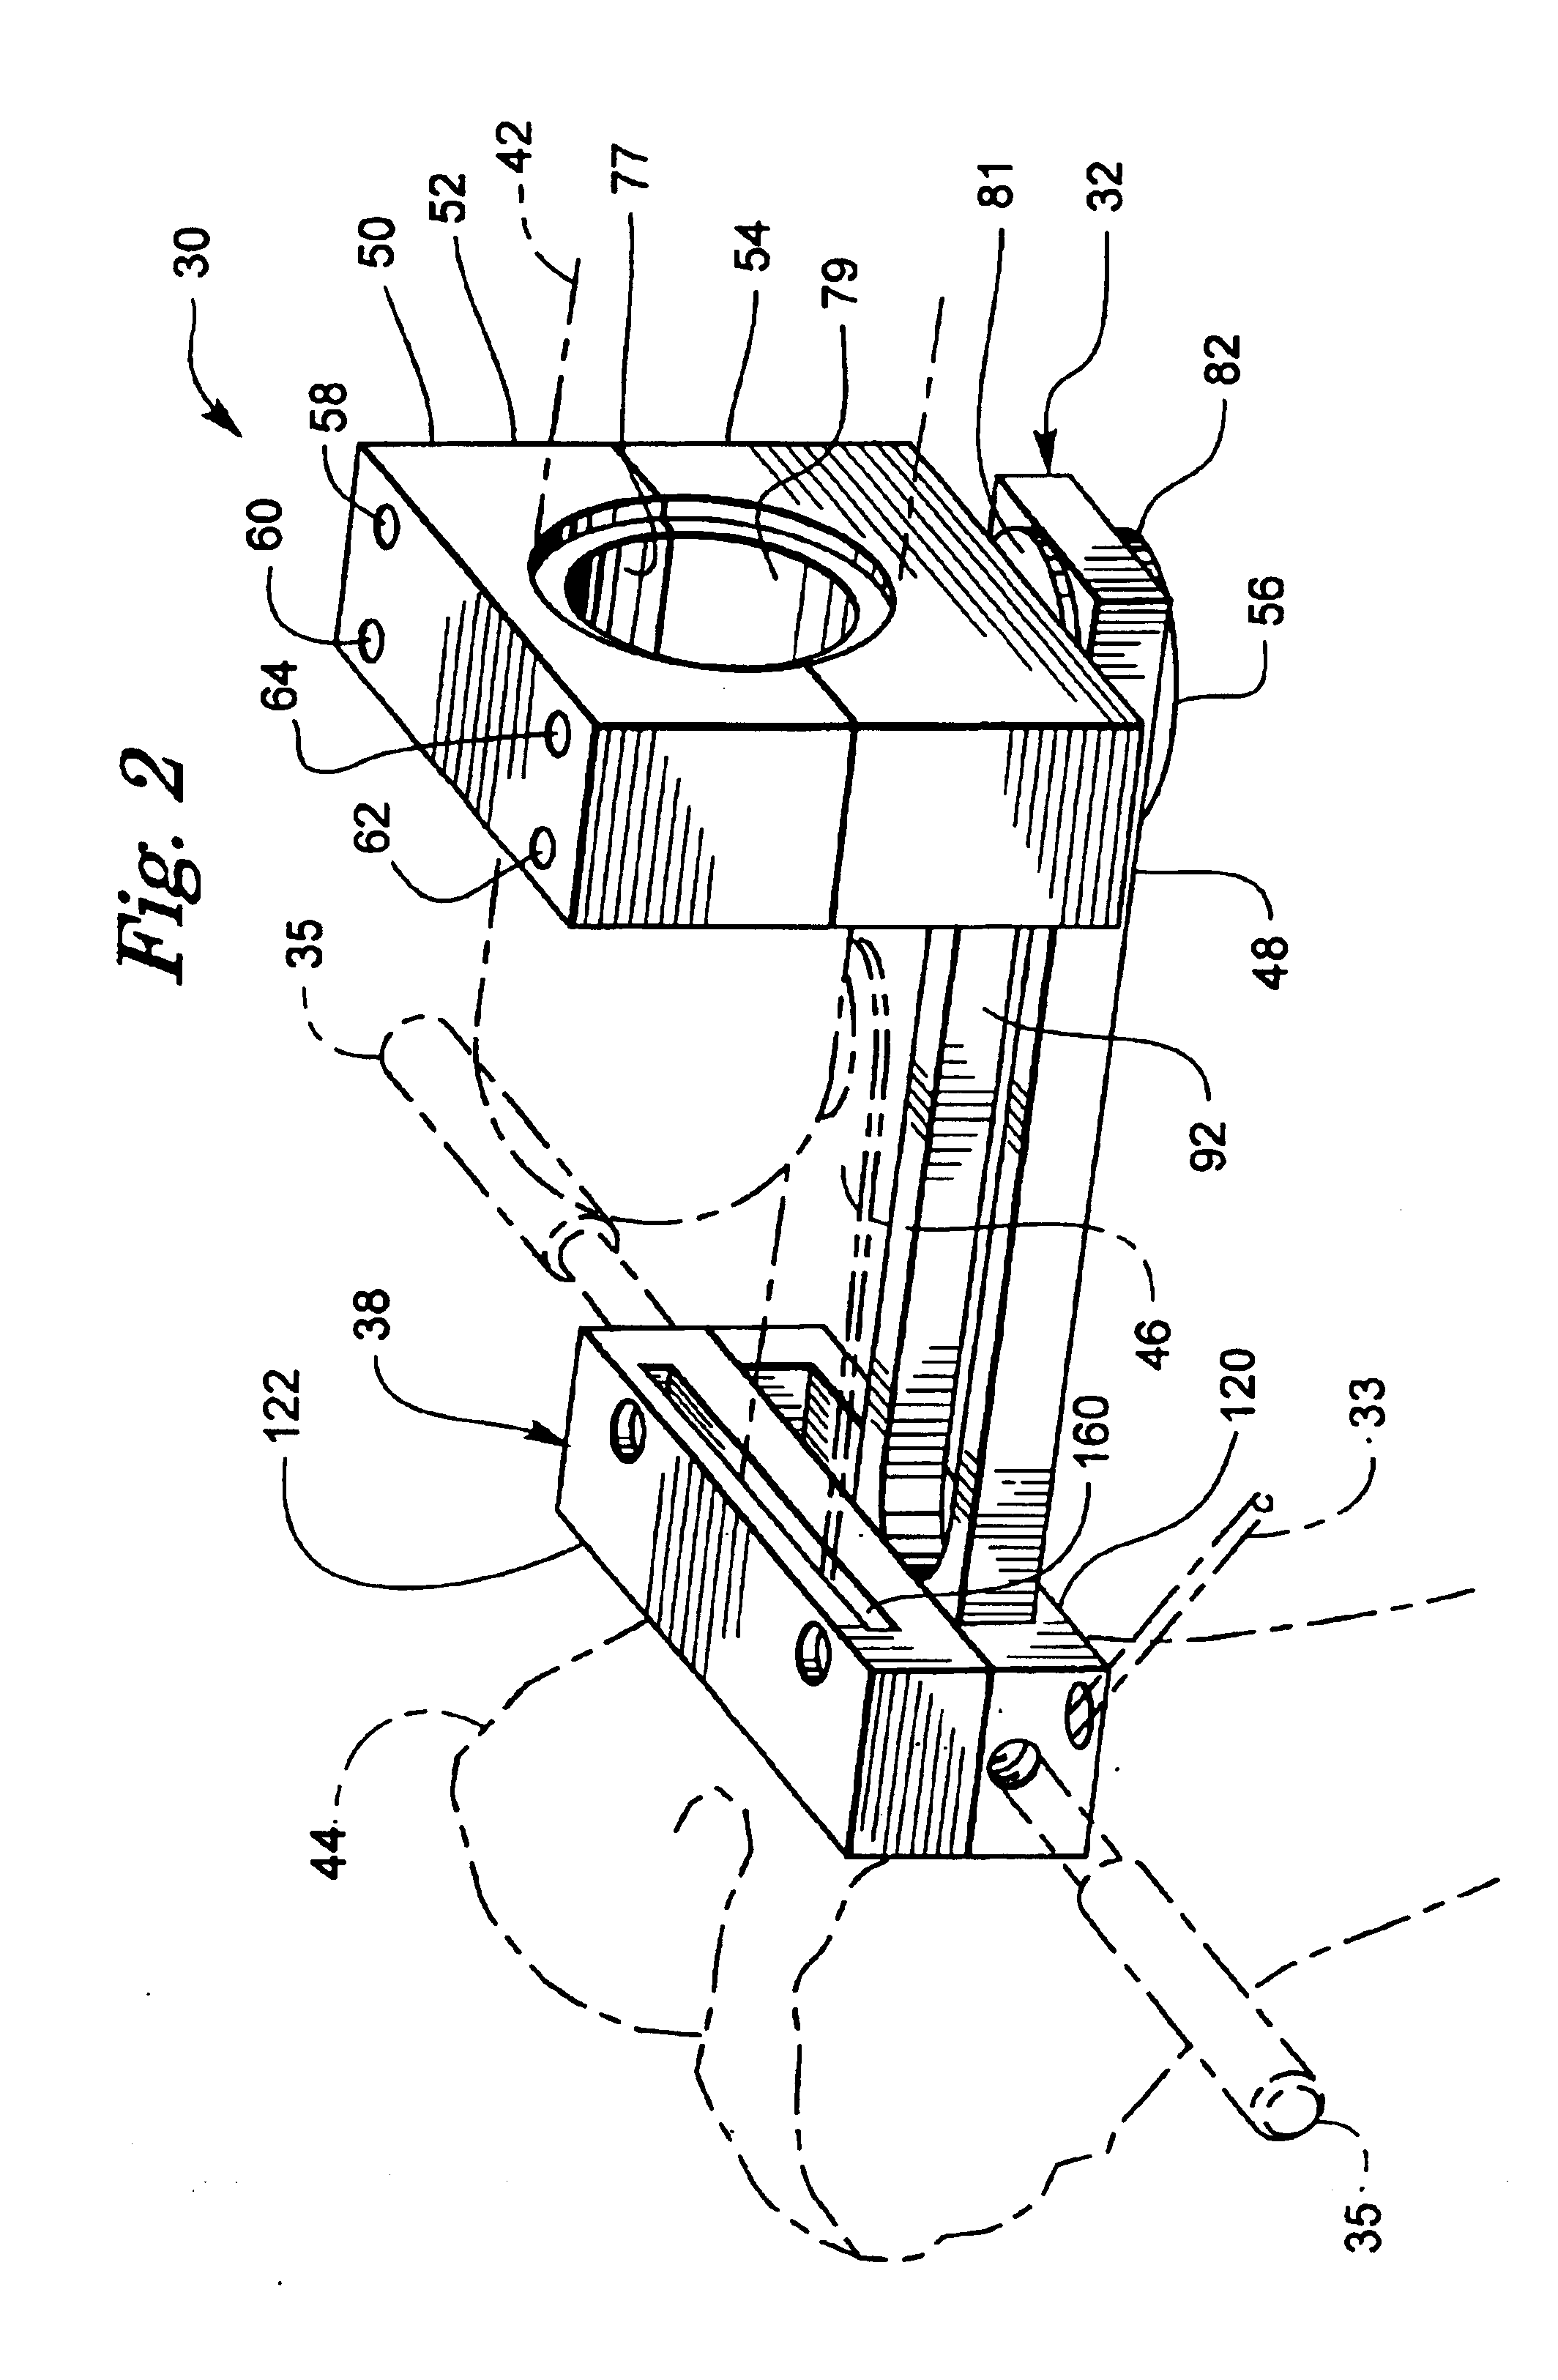 Rotating track cutting guide system